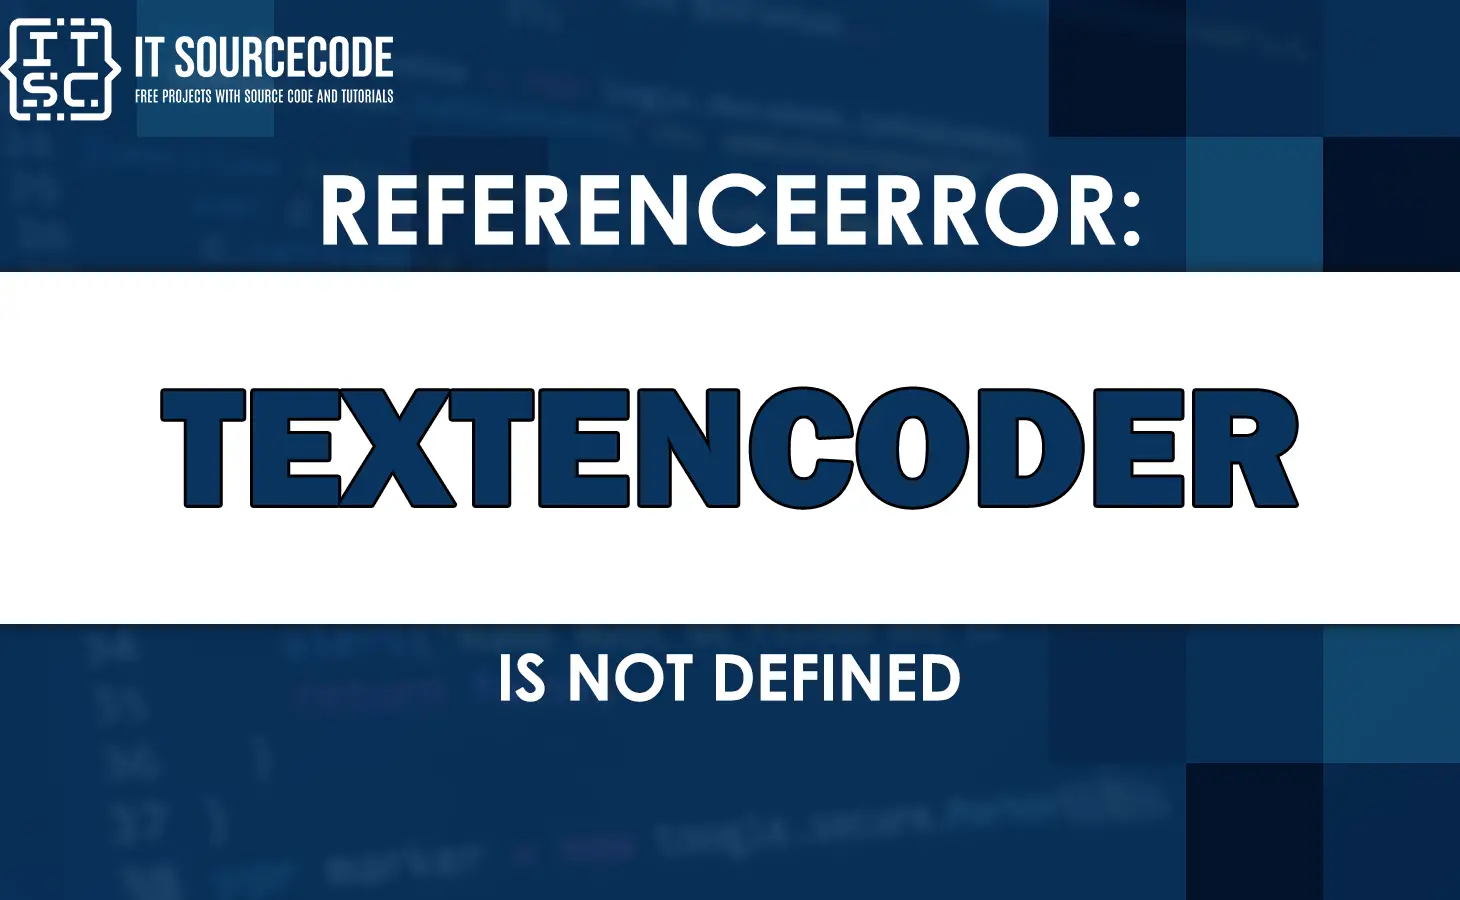 referenceerror textencoder is not defined